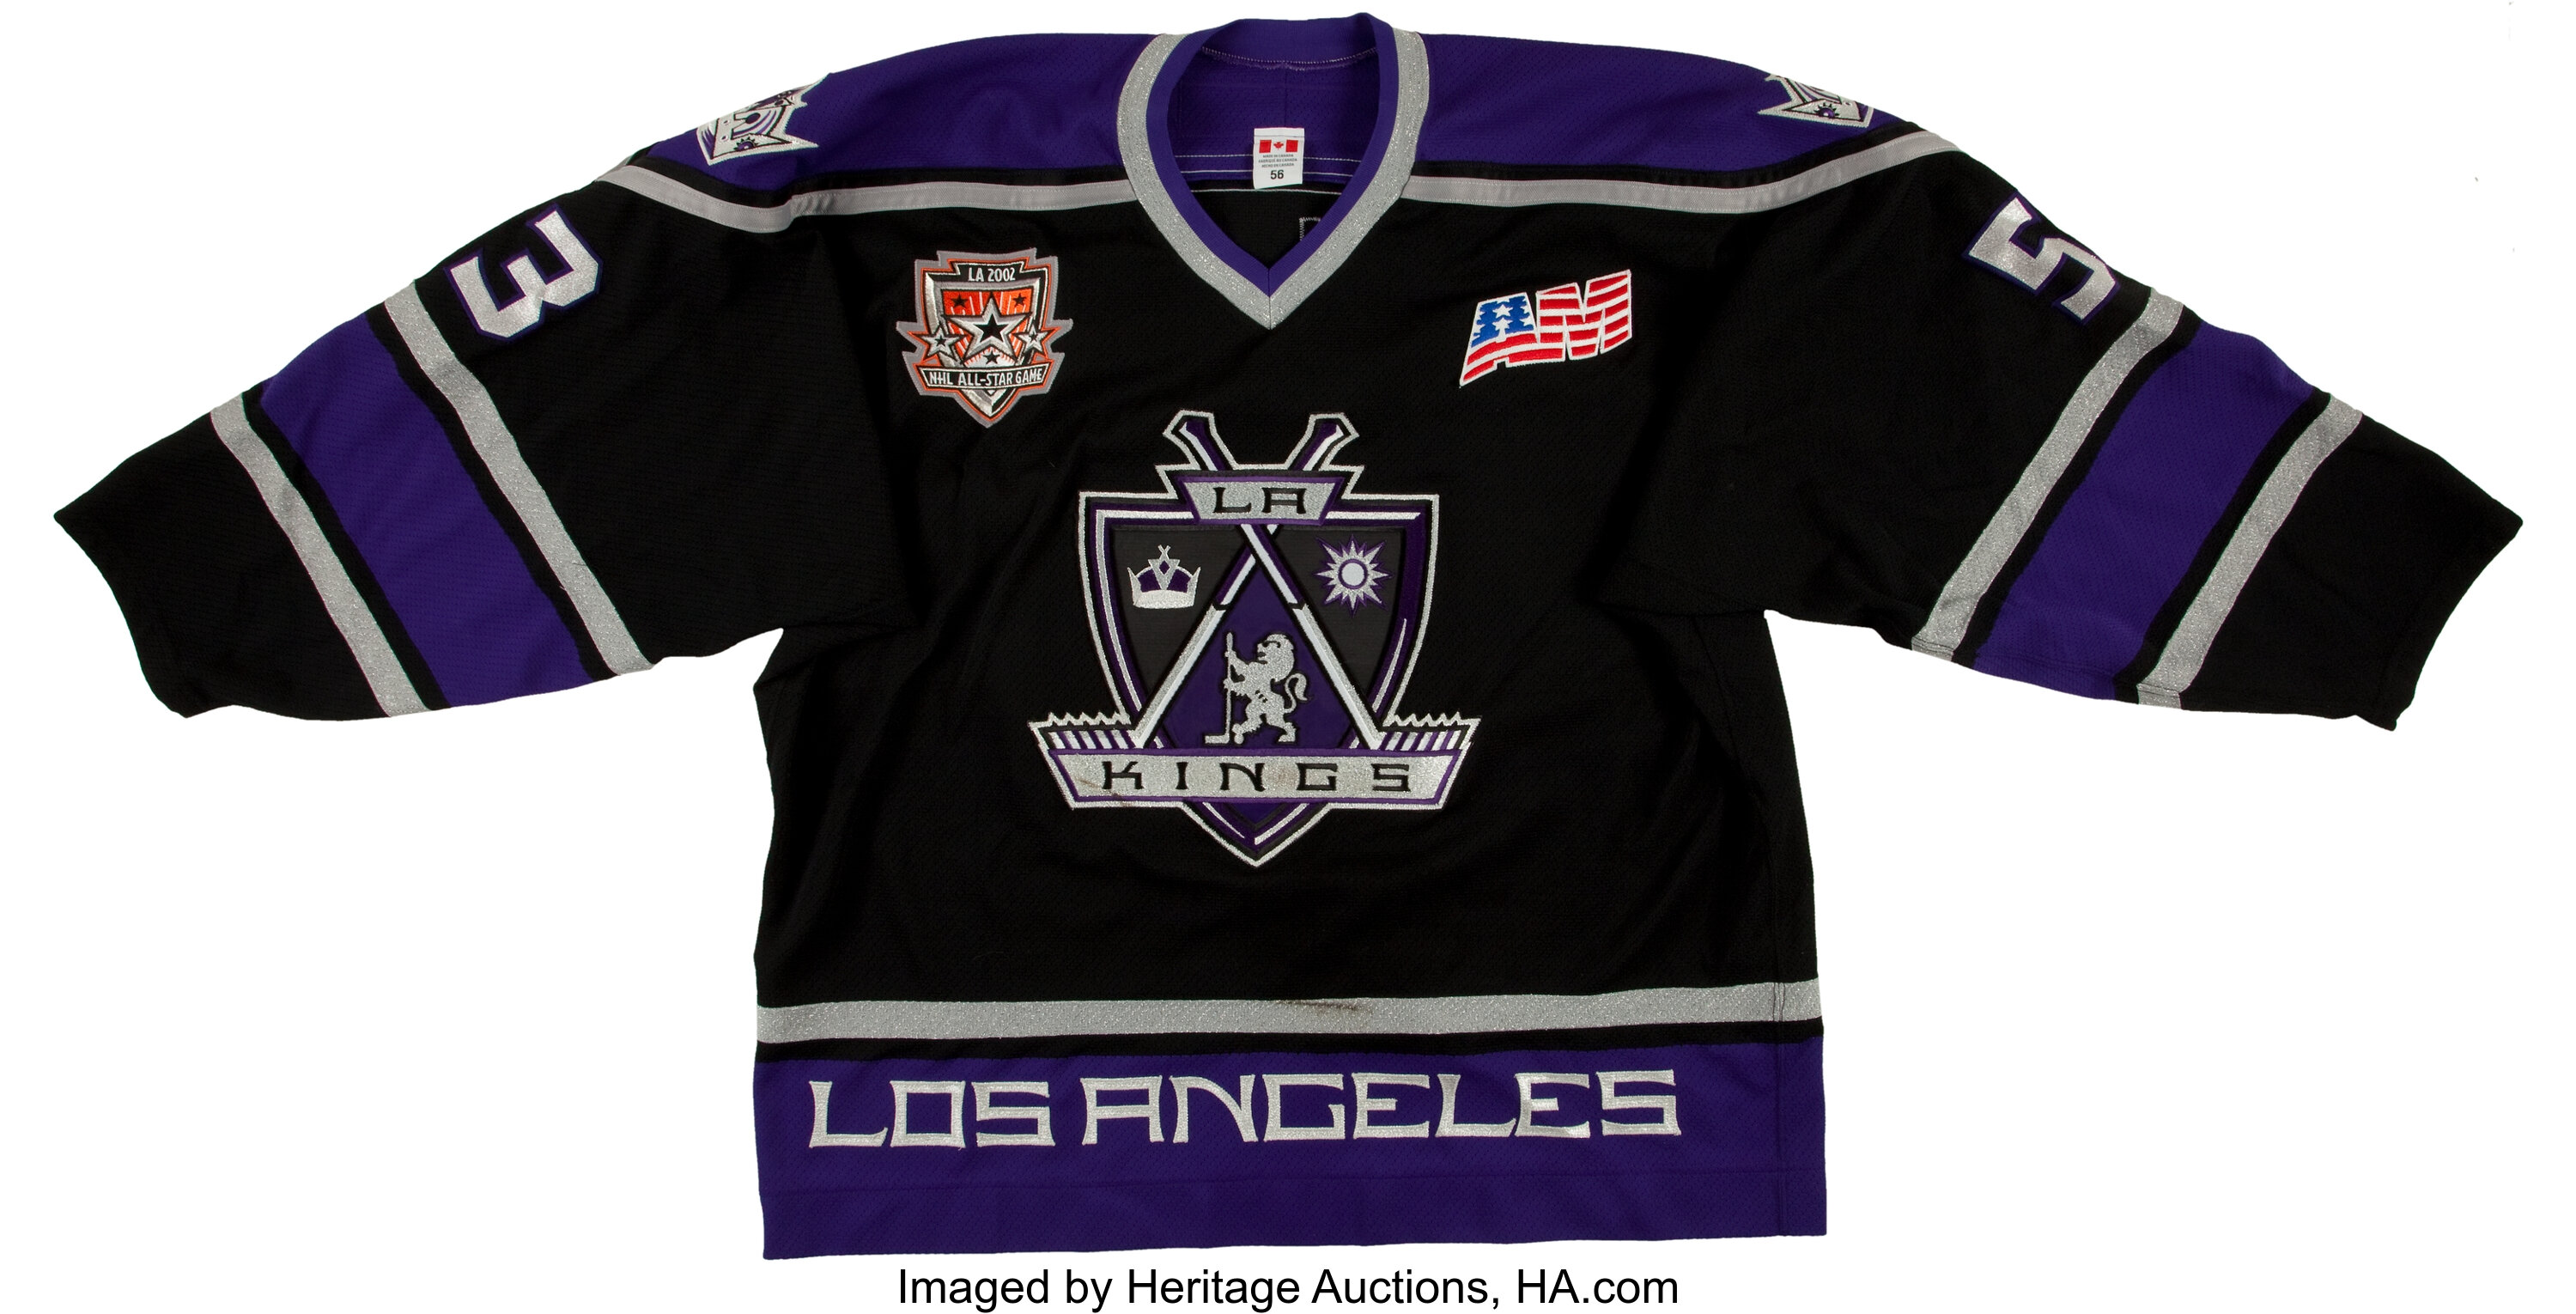 NHL All-Star Game jerseys pay tribute to the Kings - Los Angeles Times